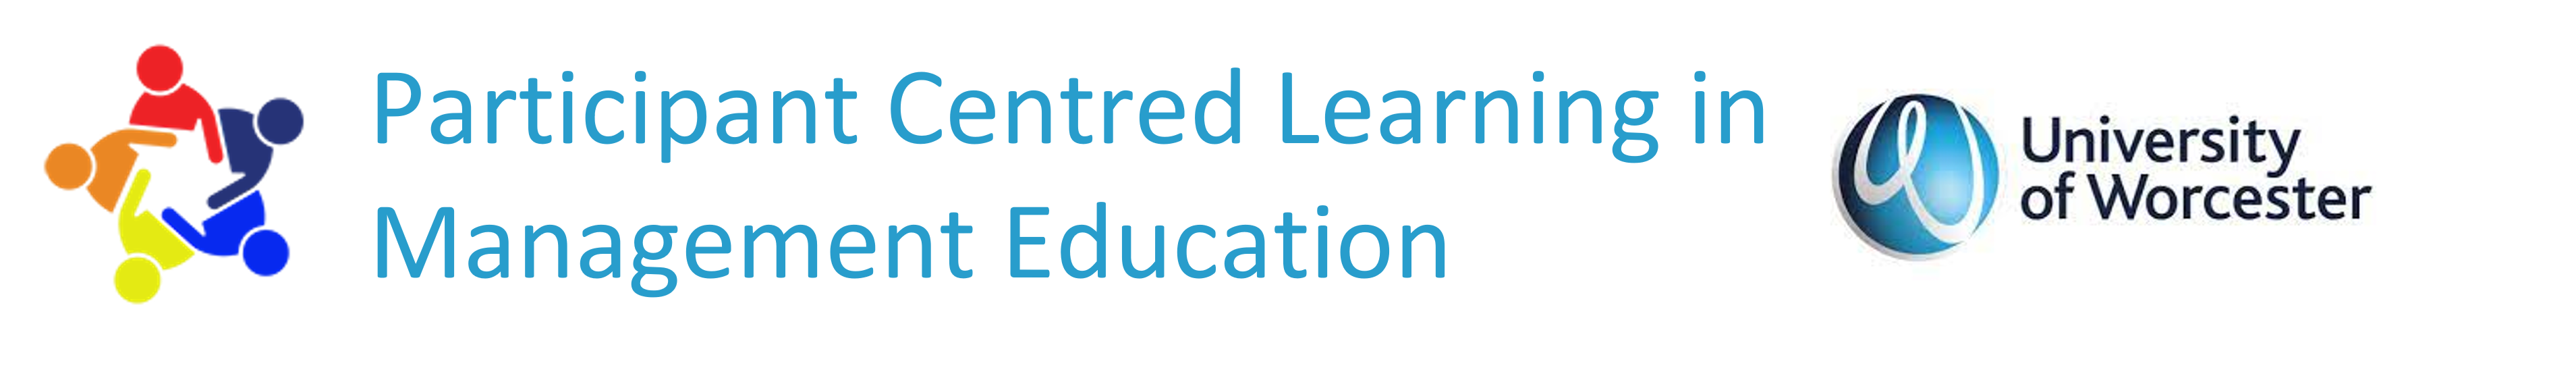 Participant Centred Learning in Management Education 